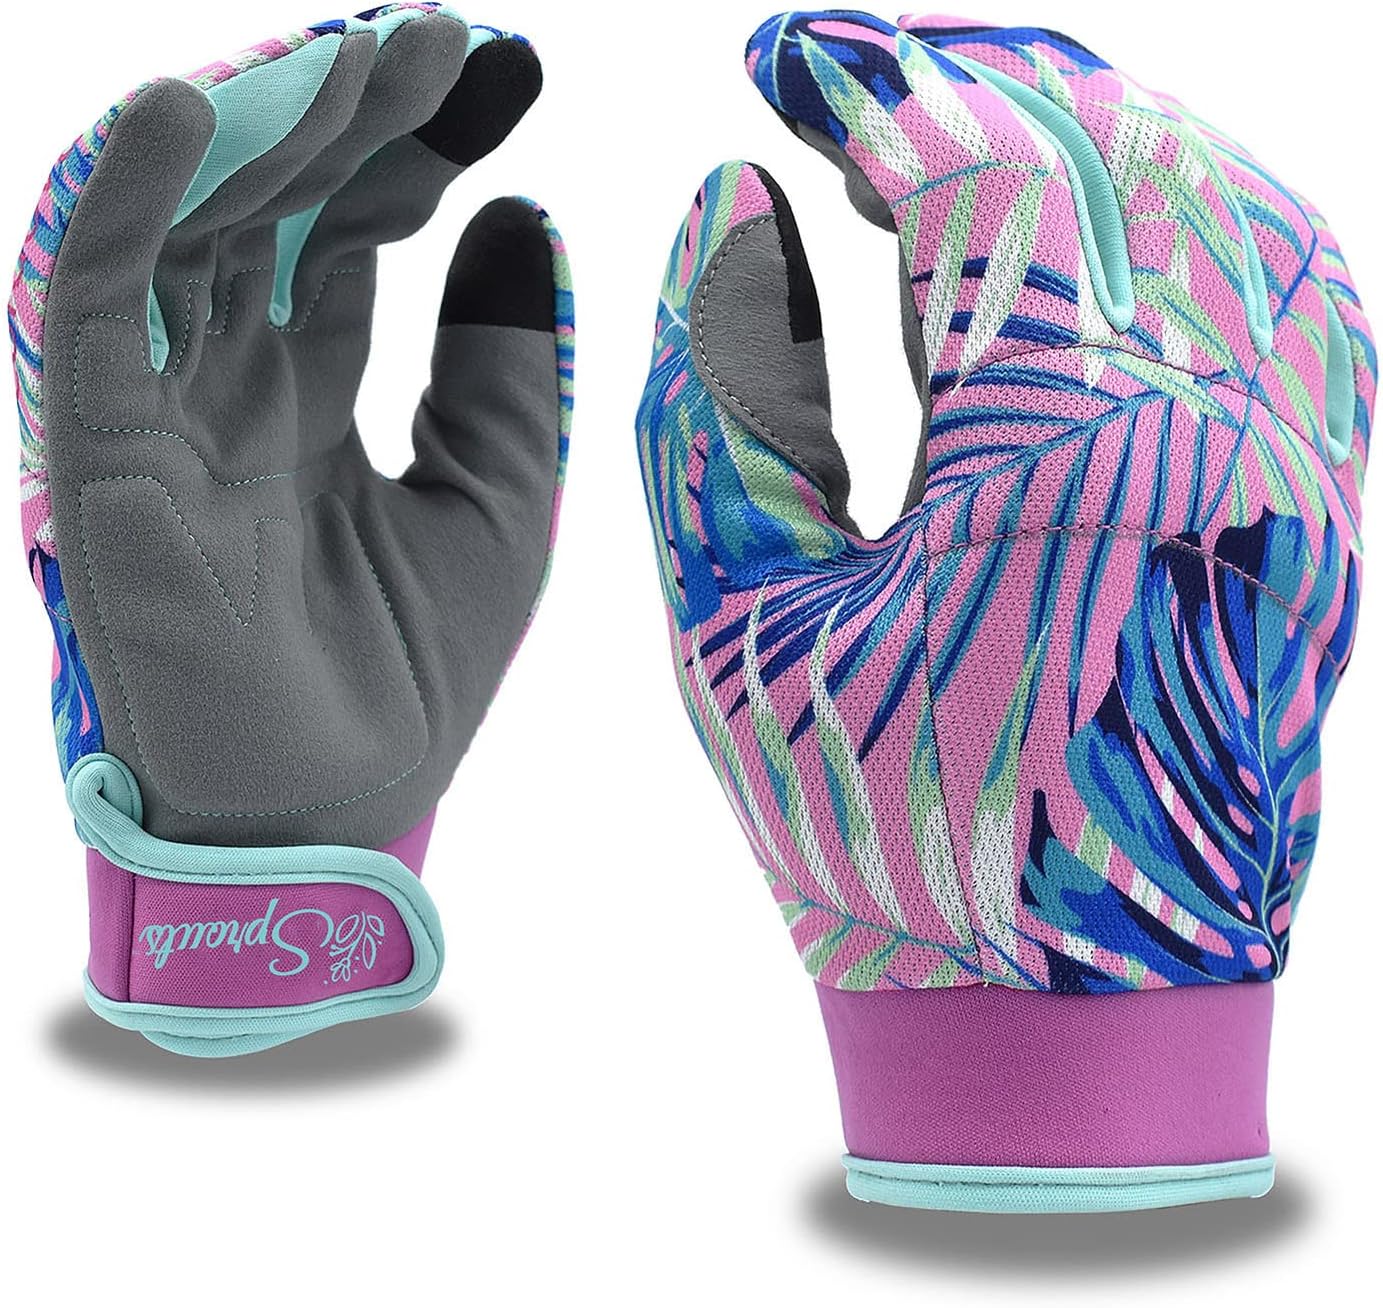 Tropical Gardening Gloves Pro, Protective Padding